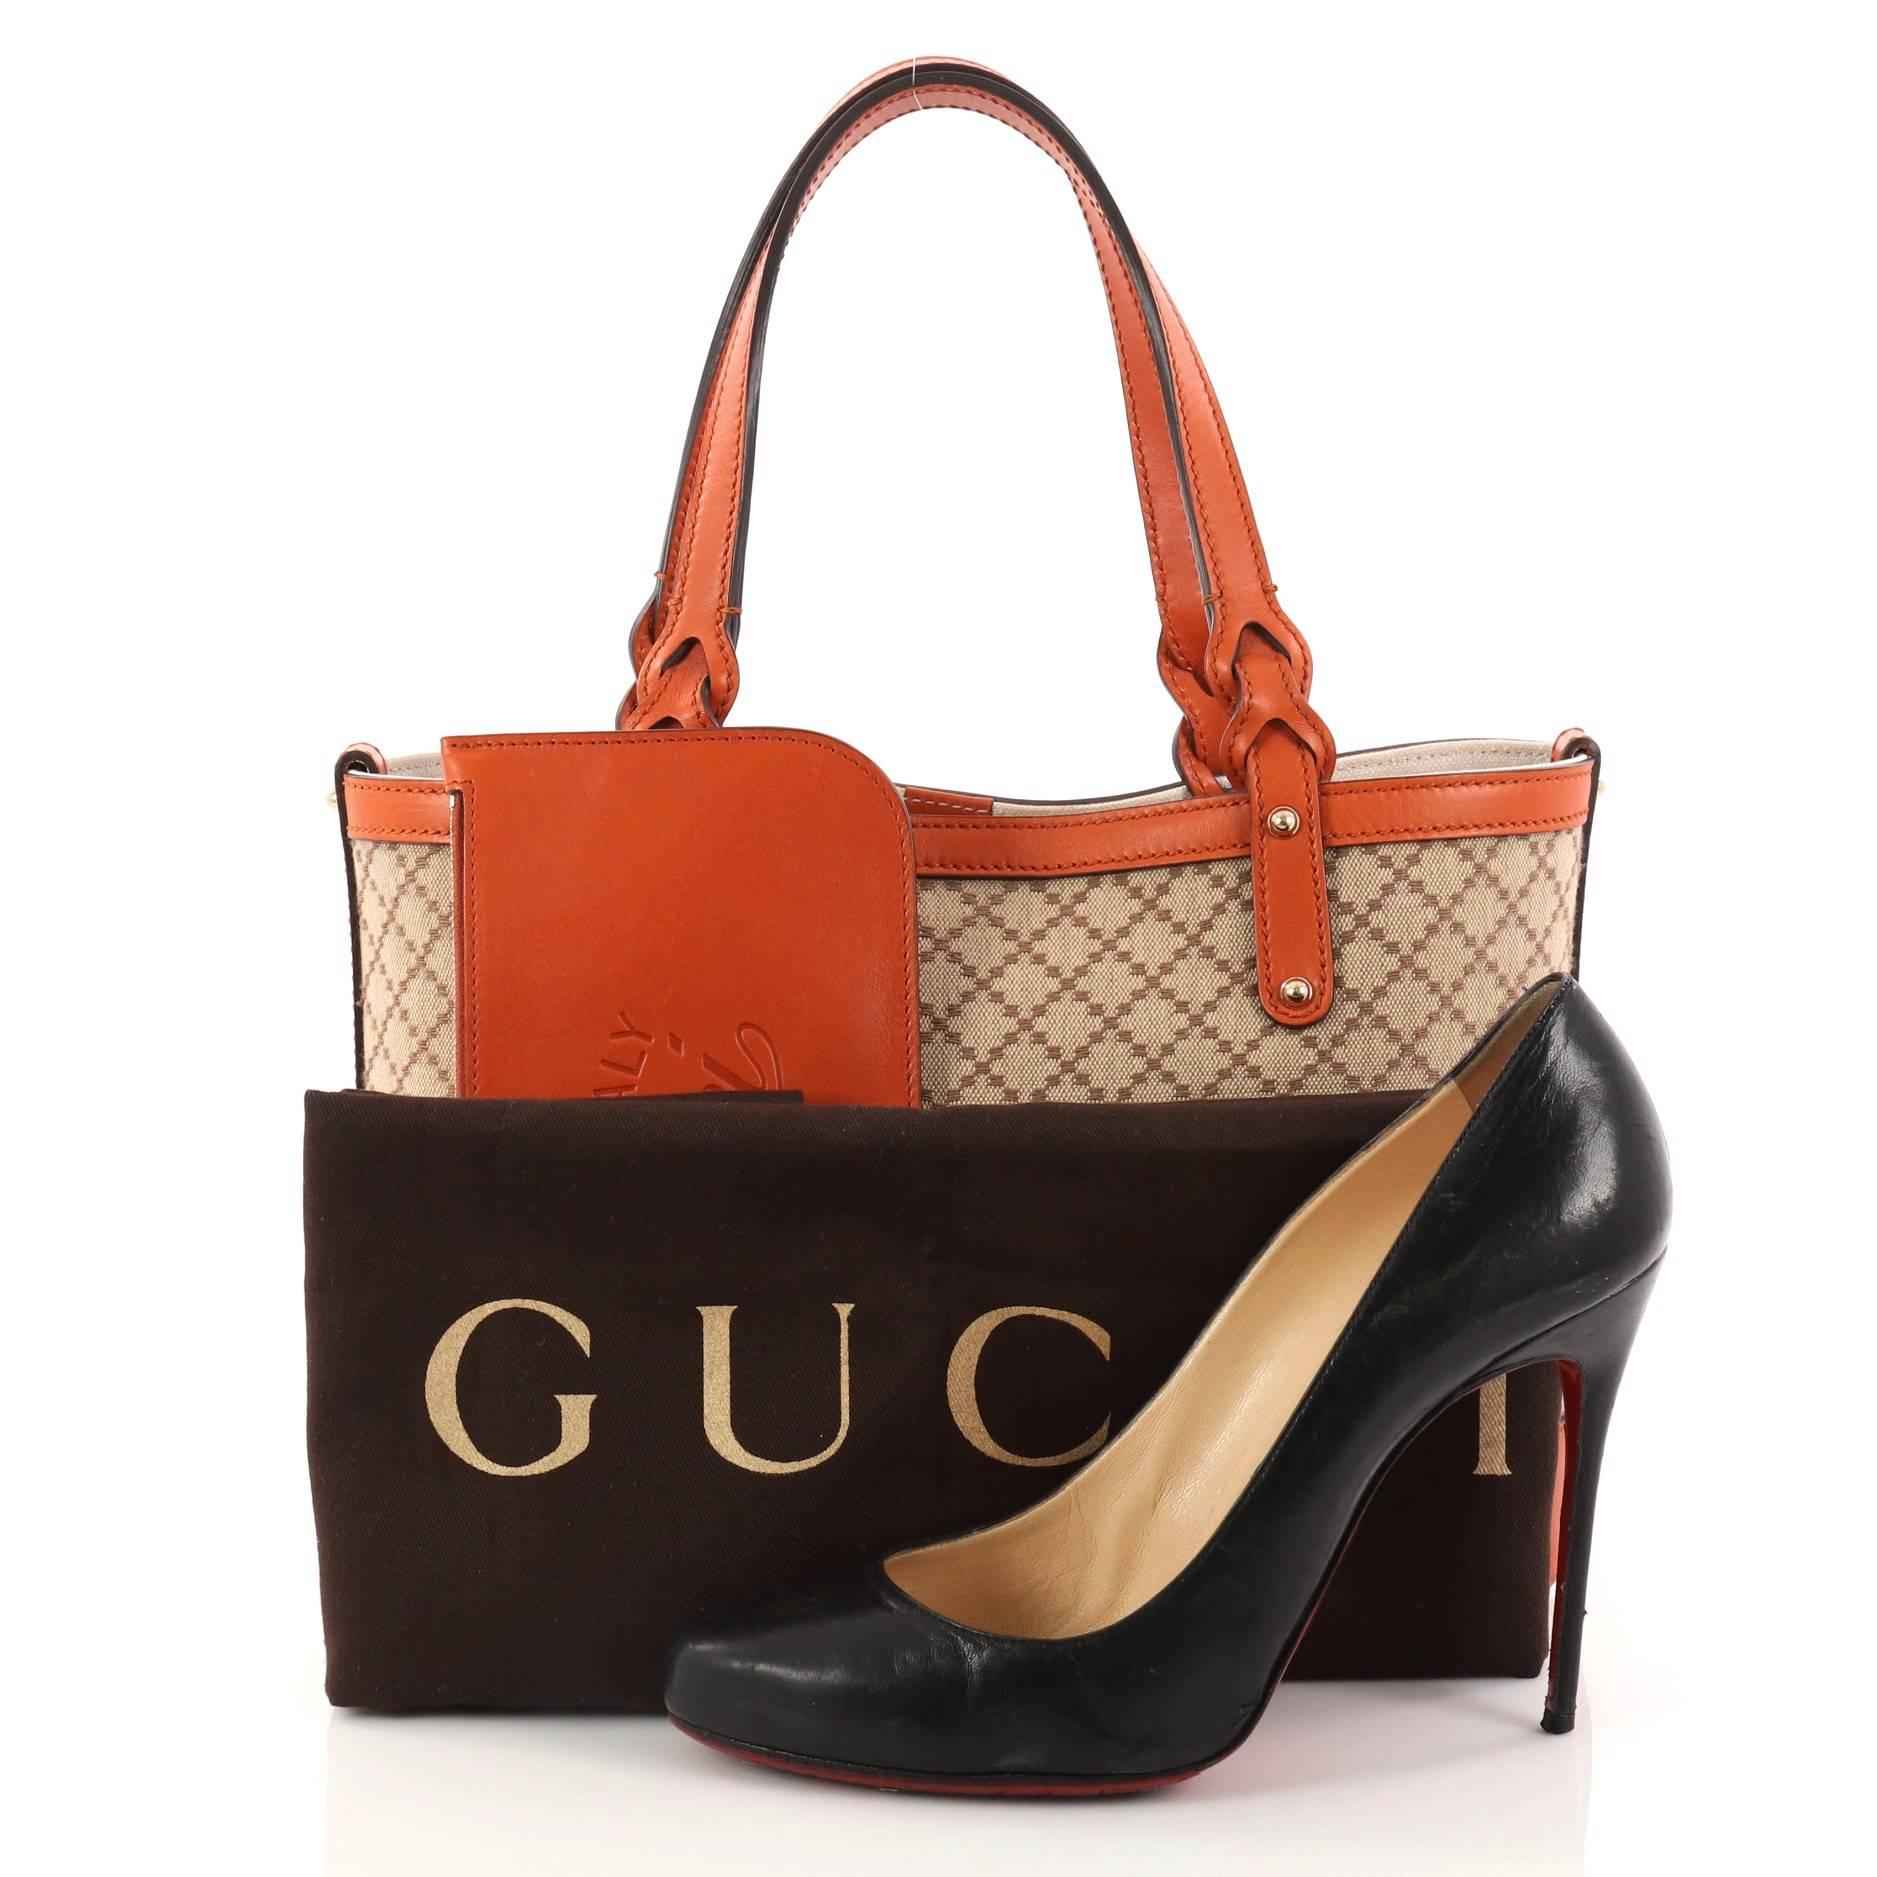 This authentic Gucci Craft Tote Diamante Canvas Small is casual and stylish perfect for everyday use. Crafted from brown diamante canvas with orange leather trims, this tote features dual-flat handles with braided ends and gold-tone hardware